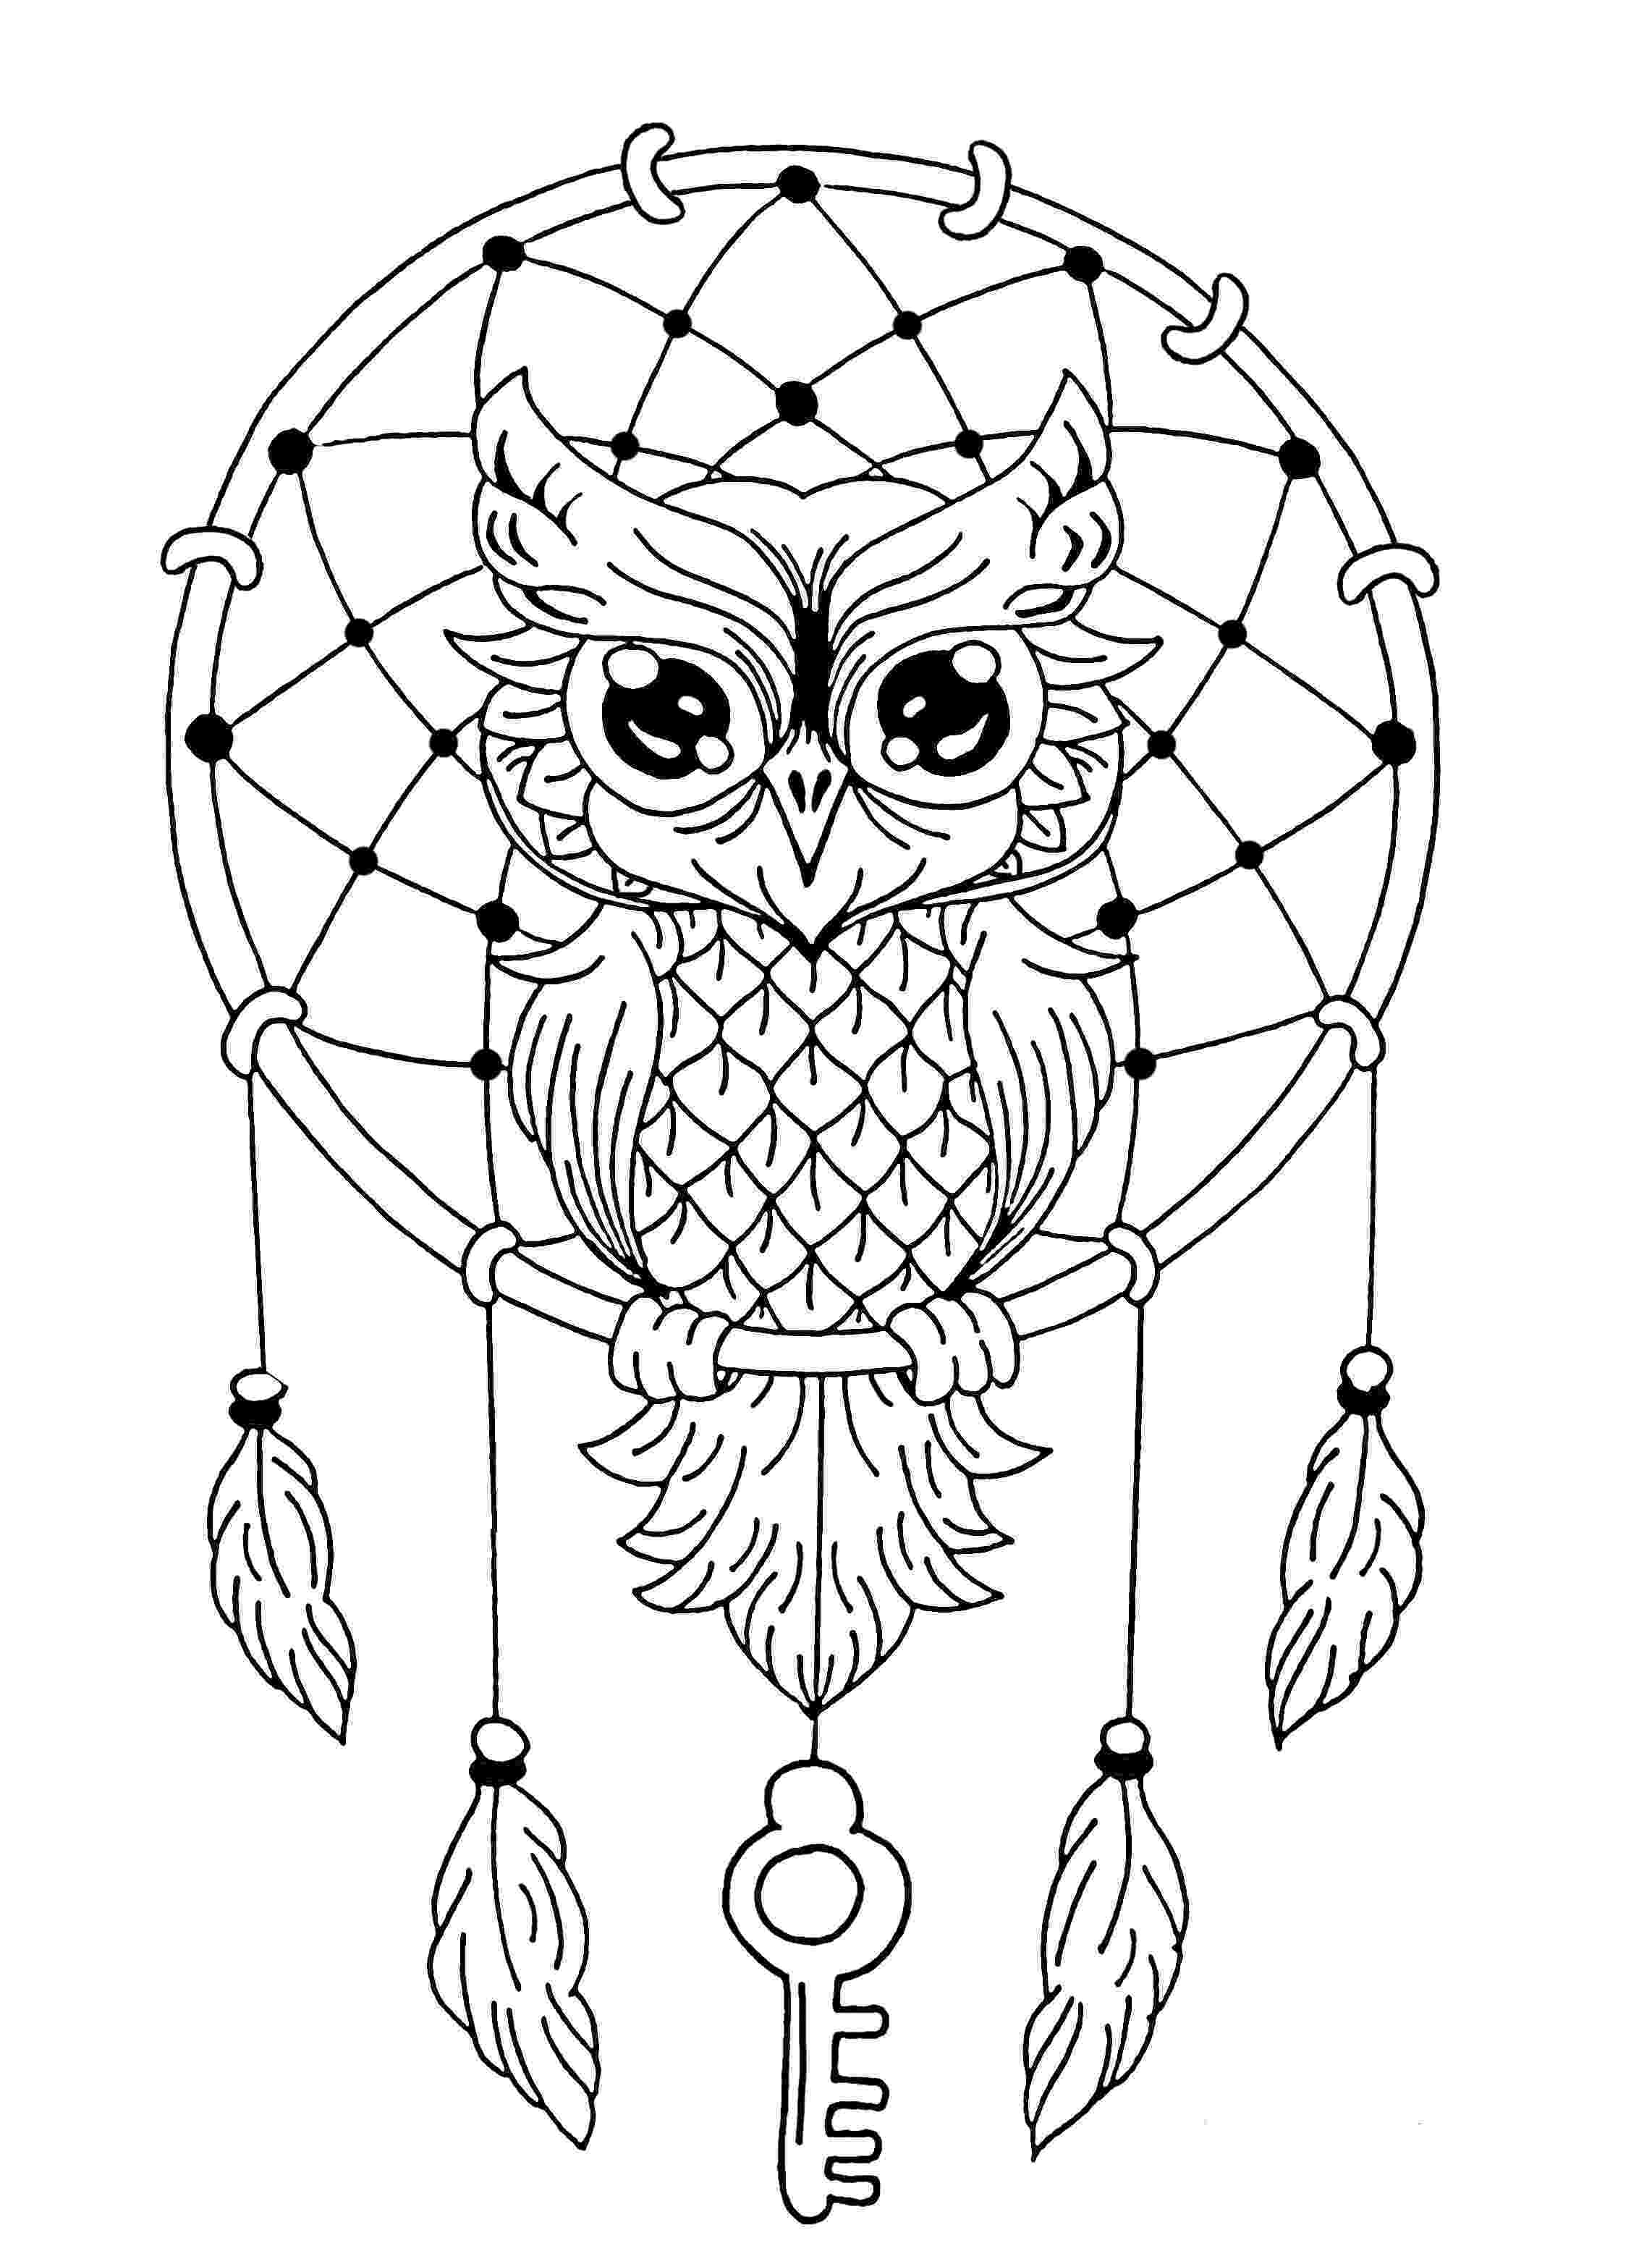 colored pictures of owls owl coloring pages all about owl owls of colored pictures 